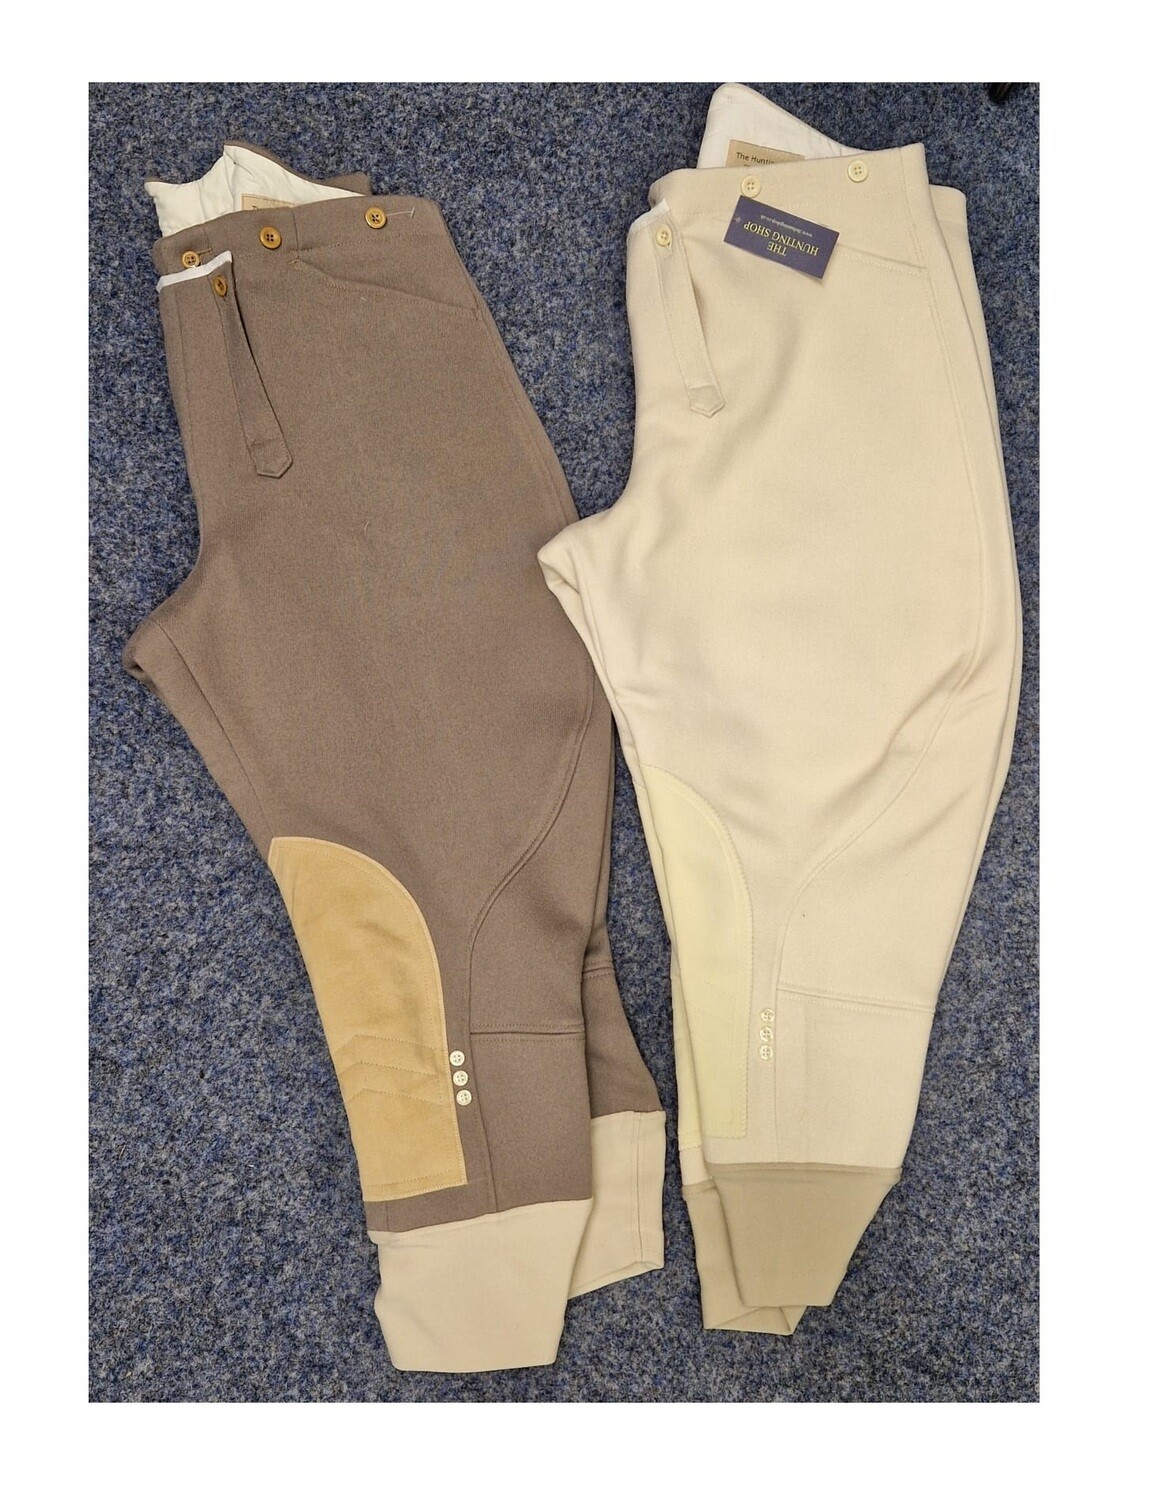 Gents 42" Fawn, Cavalry Twill Hunting Breeches - End of Season Sale